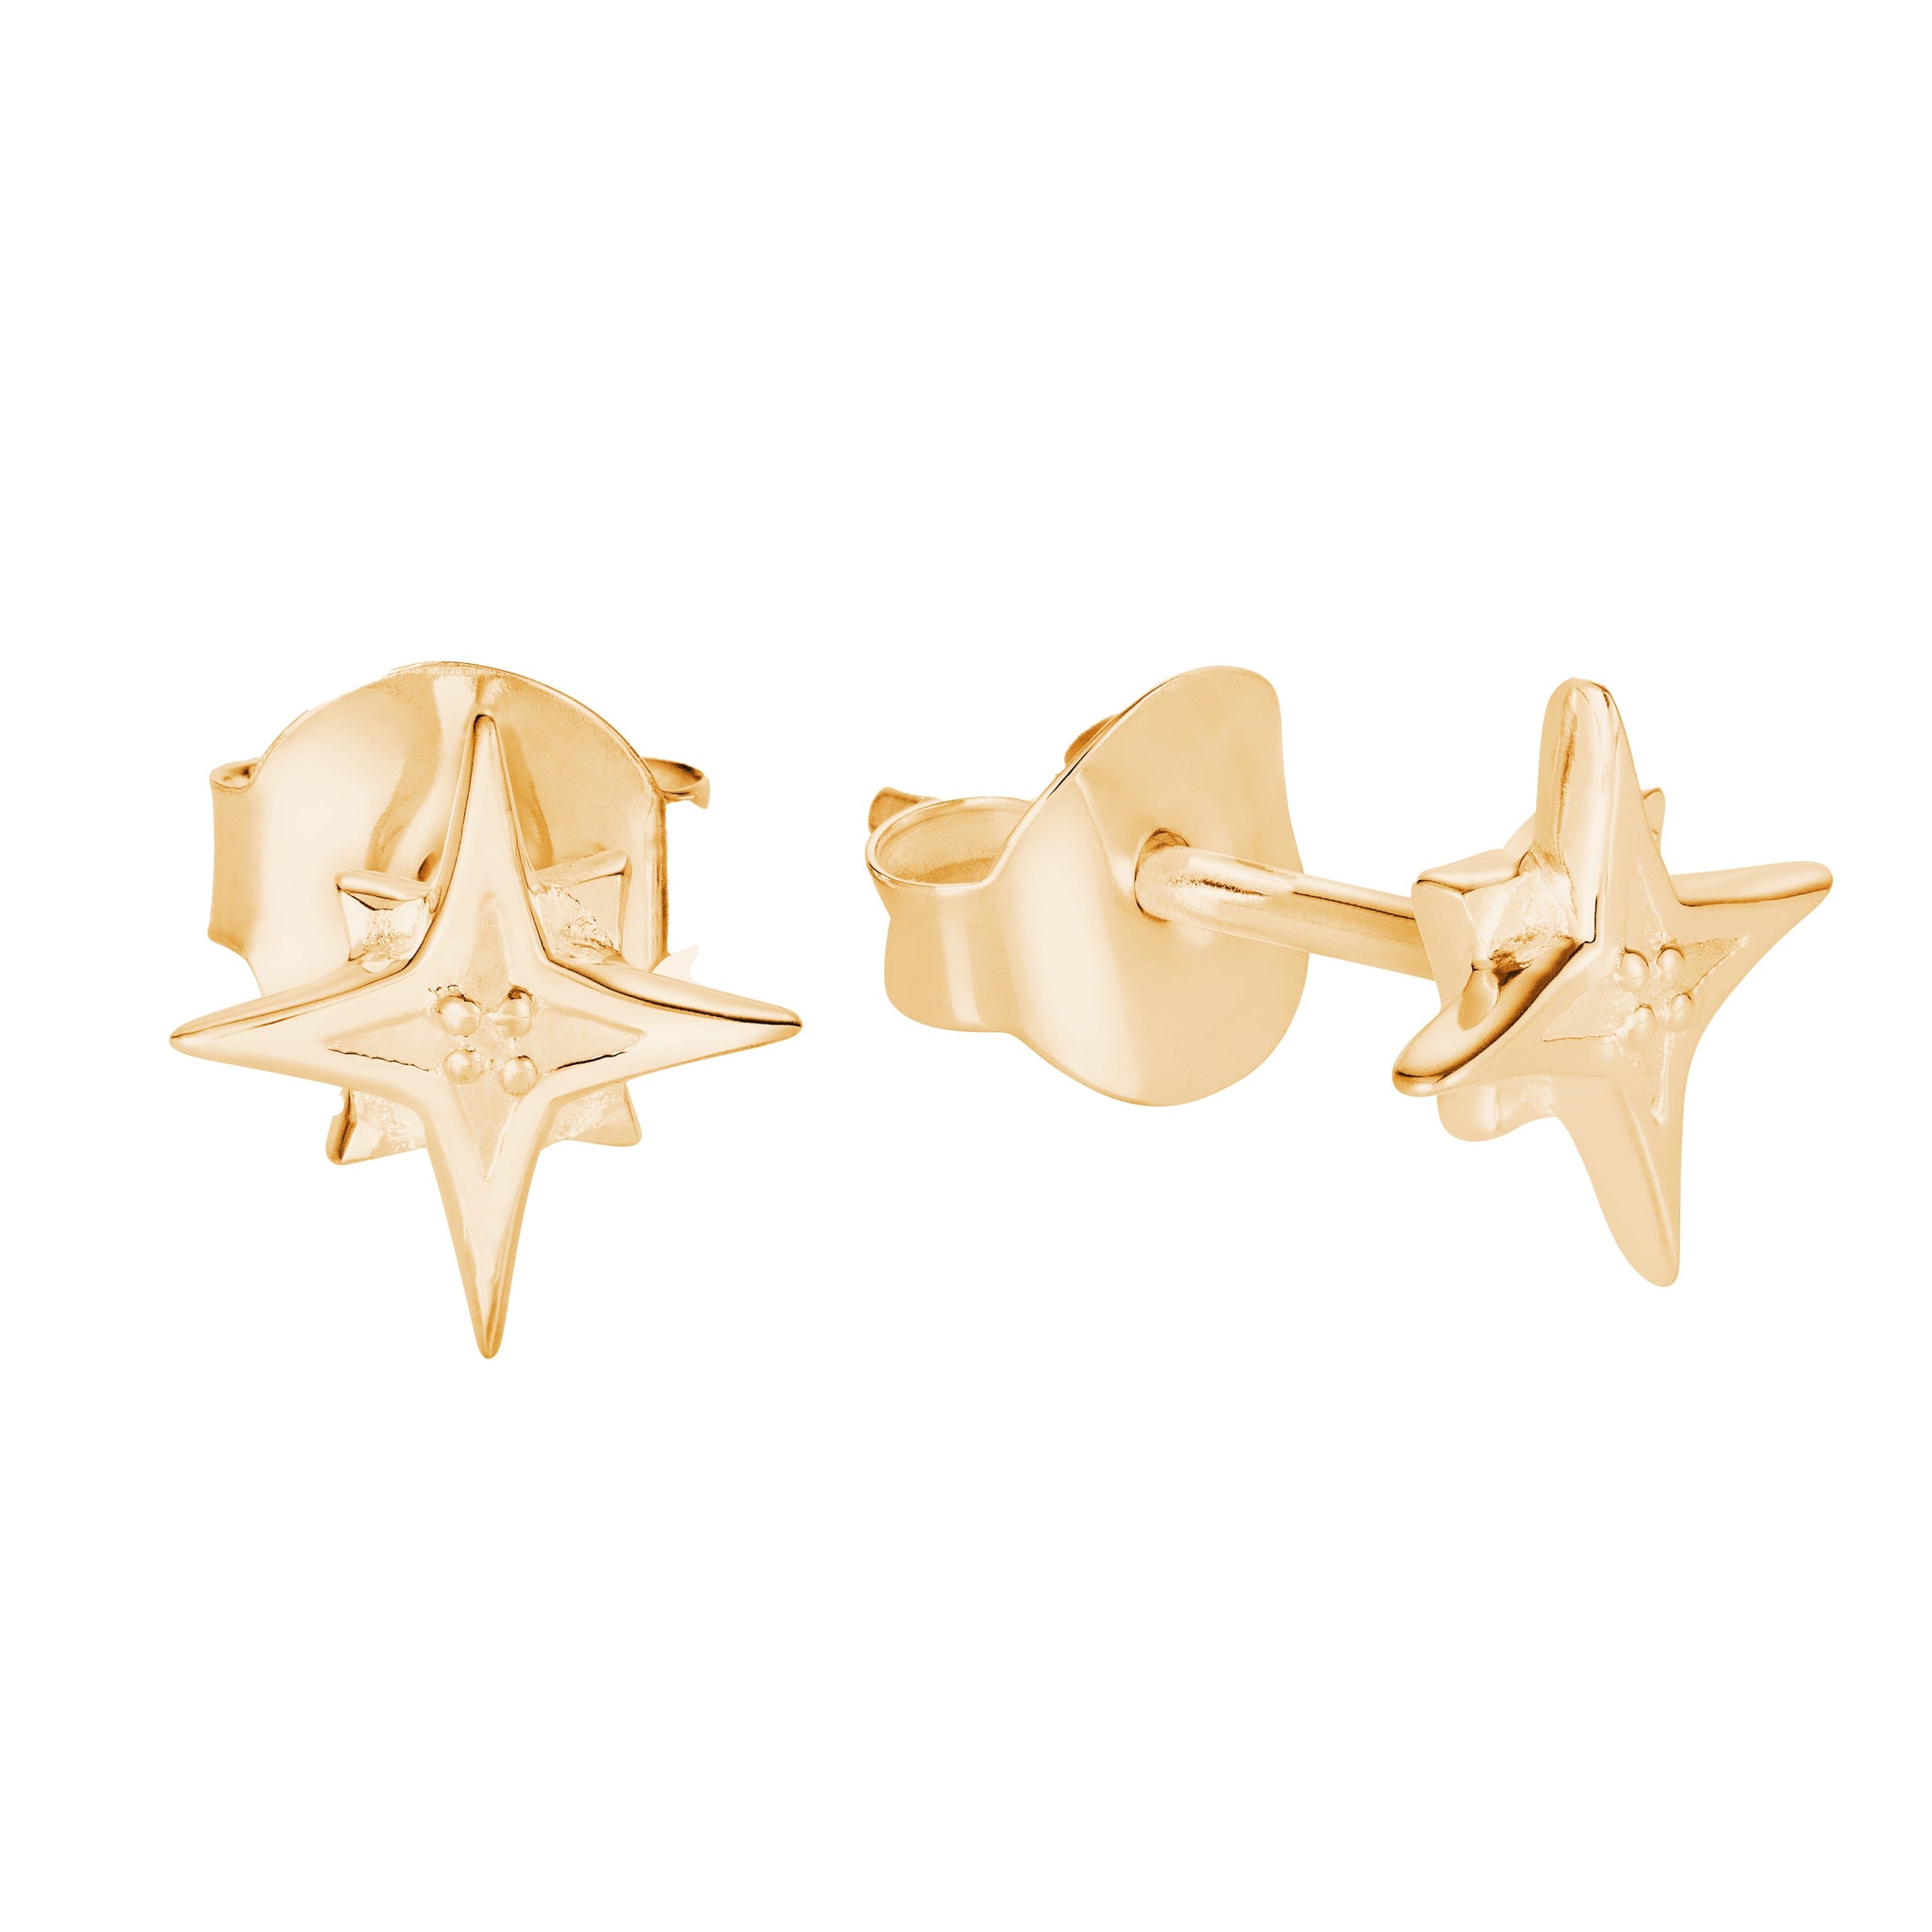 9ct Gold Compass Star Stud Earrings by Yasmin Everley